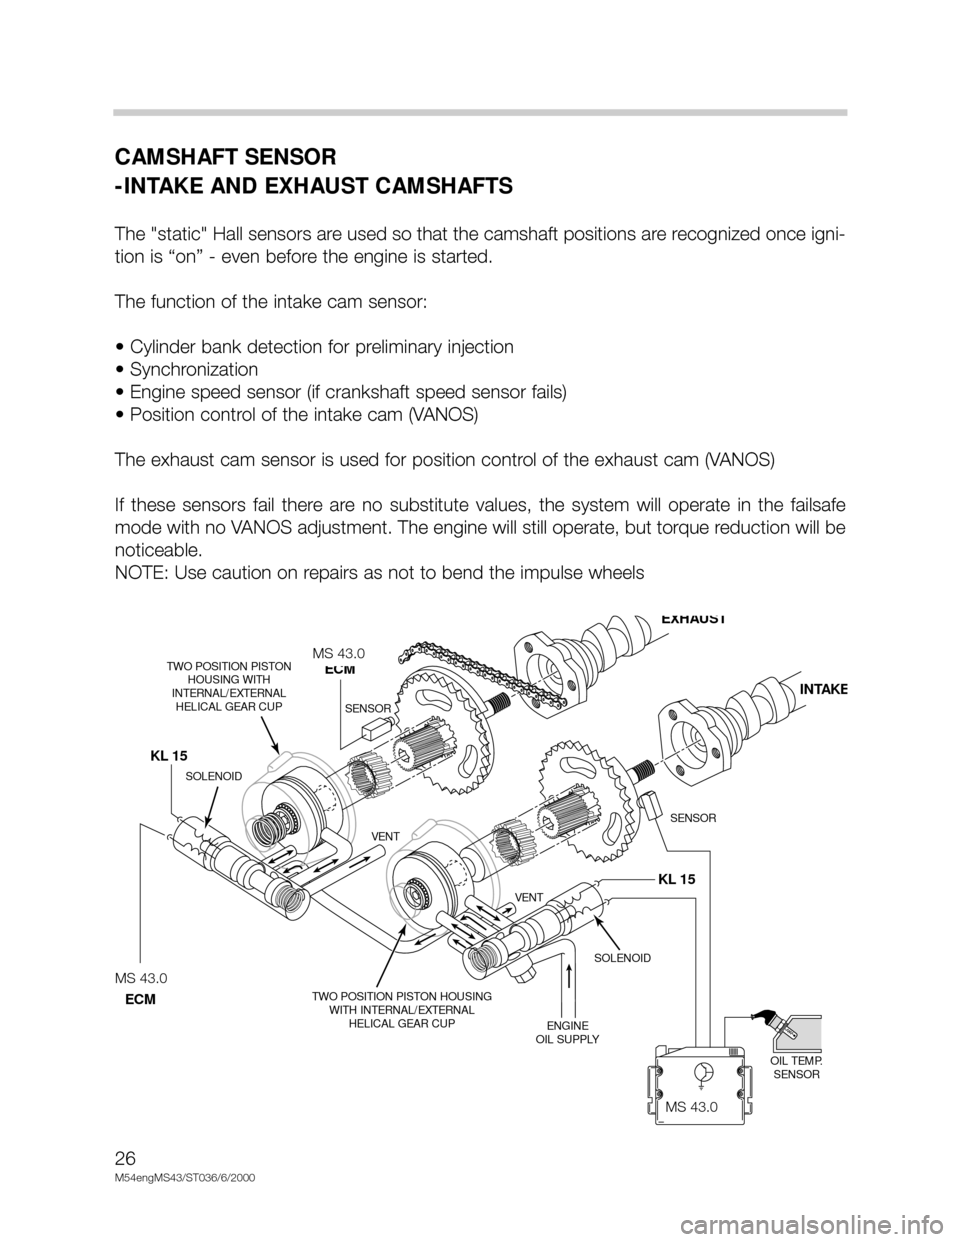 BMW X5 2001 E53 M54 Engine Owners Manual 26
M54engMS43/ST036/6/2000
CAMSHAFT SENSOR
-INTAKE AND EXHAUST CAMSHAFTS
The "static" Hall sensors are used so that the camshaft positions are recognized once igni-
tion is “on” - even before the 